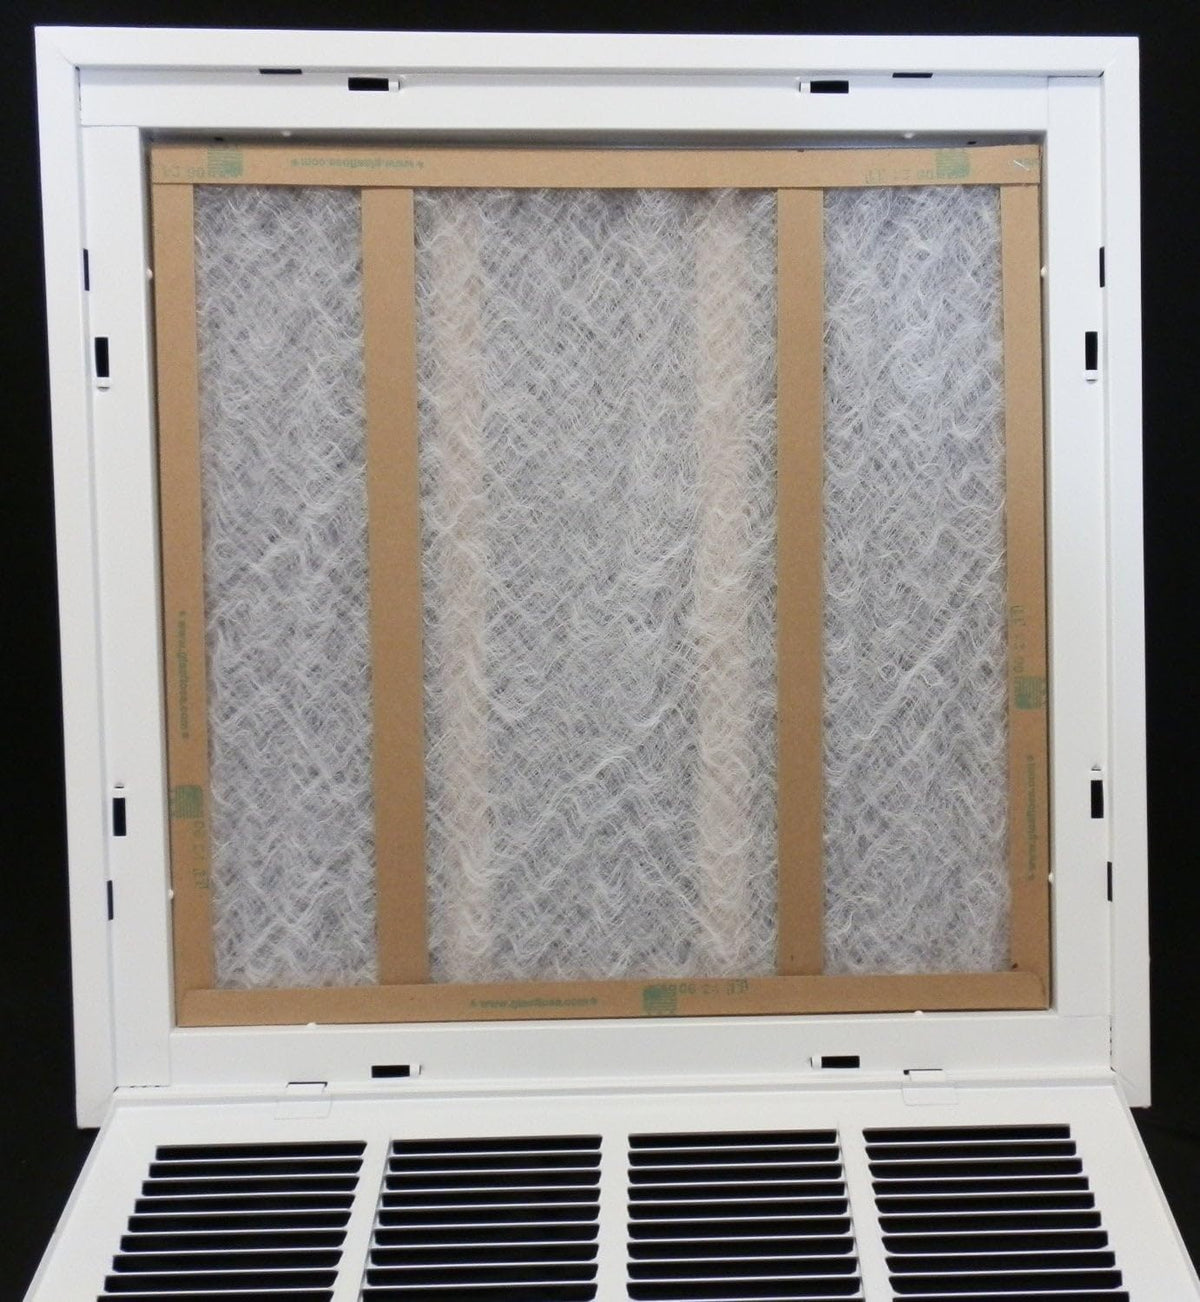 24&quot; X 14&quot; Steel Return Air Filter Grille for 1&quot; Filter - Fixed Hinged - [Outer Dimensions: 26 5/8&quot; X 16 5/8&quot;]